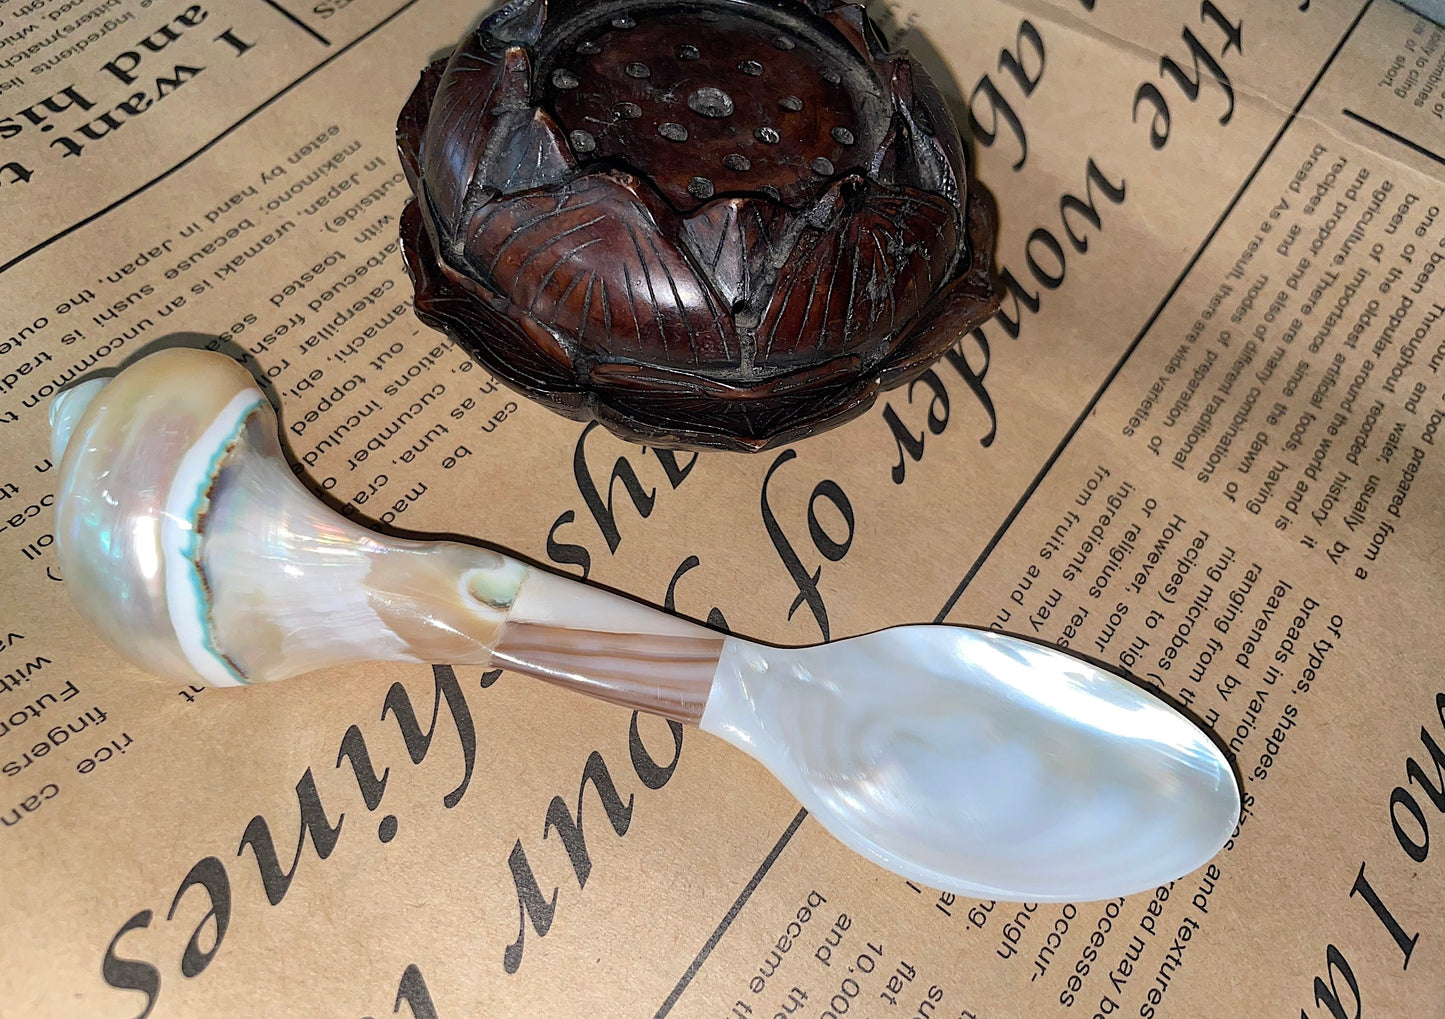 Large Mother of Pearl Shell Spoons Silverware Vietnam Organic Buffalo Horn